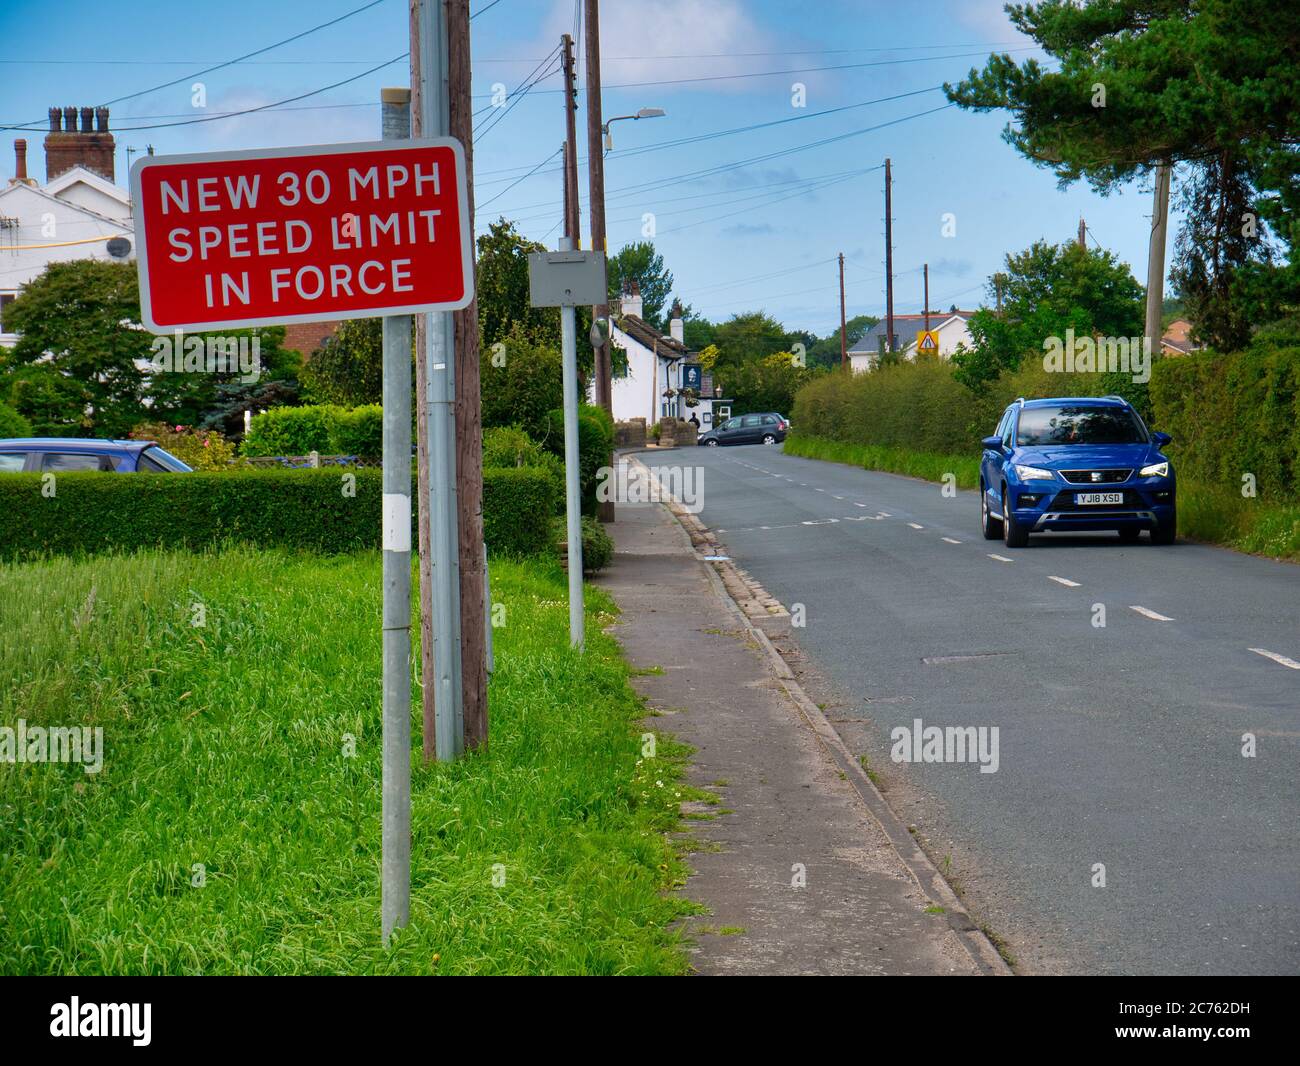 A red sign warns motorists of a new 30mph speed limit in force in the rural village of Halsall in Lancashire, UK. A blue car passes on the right. Stock Photo